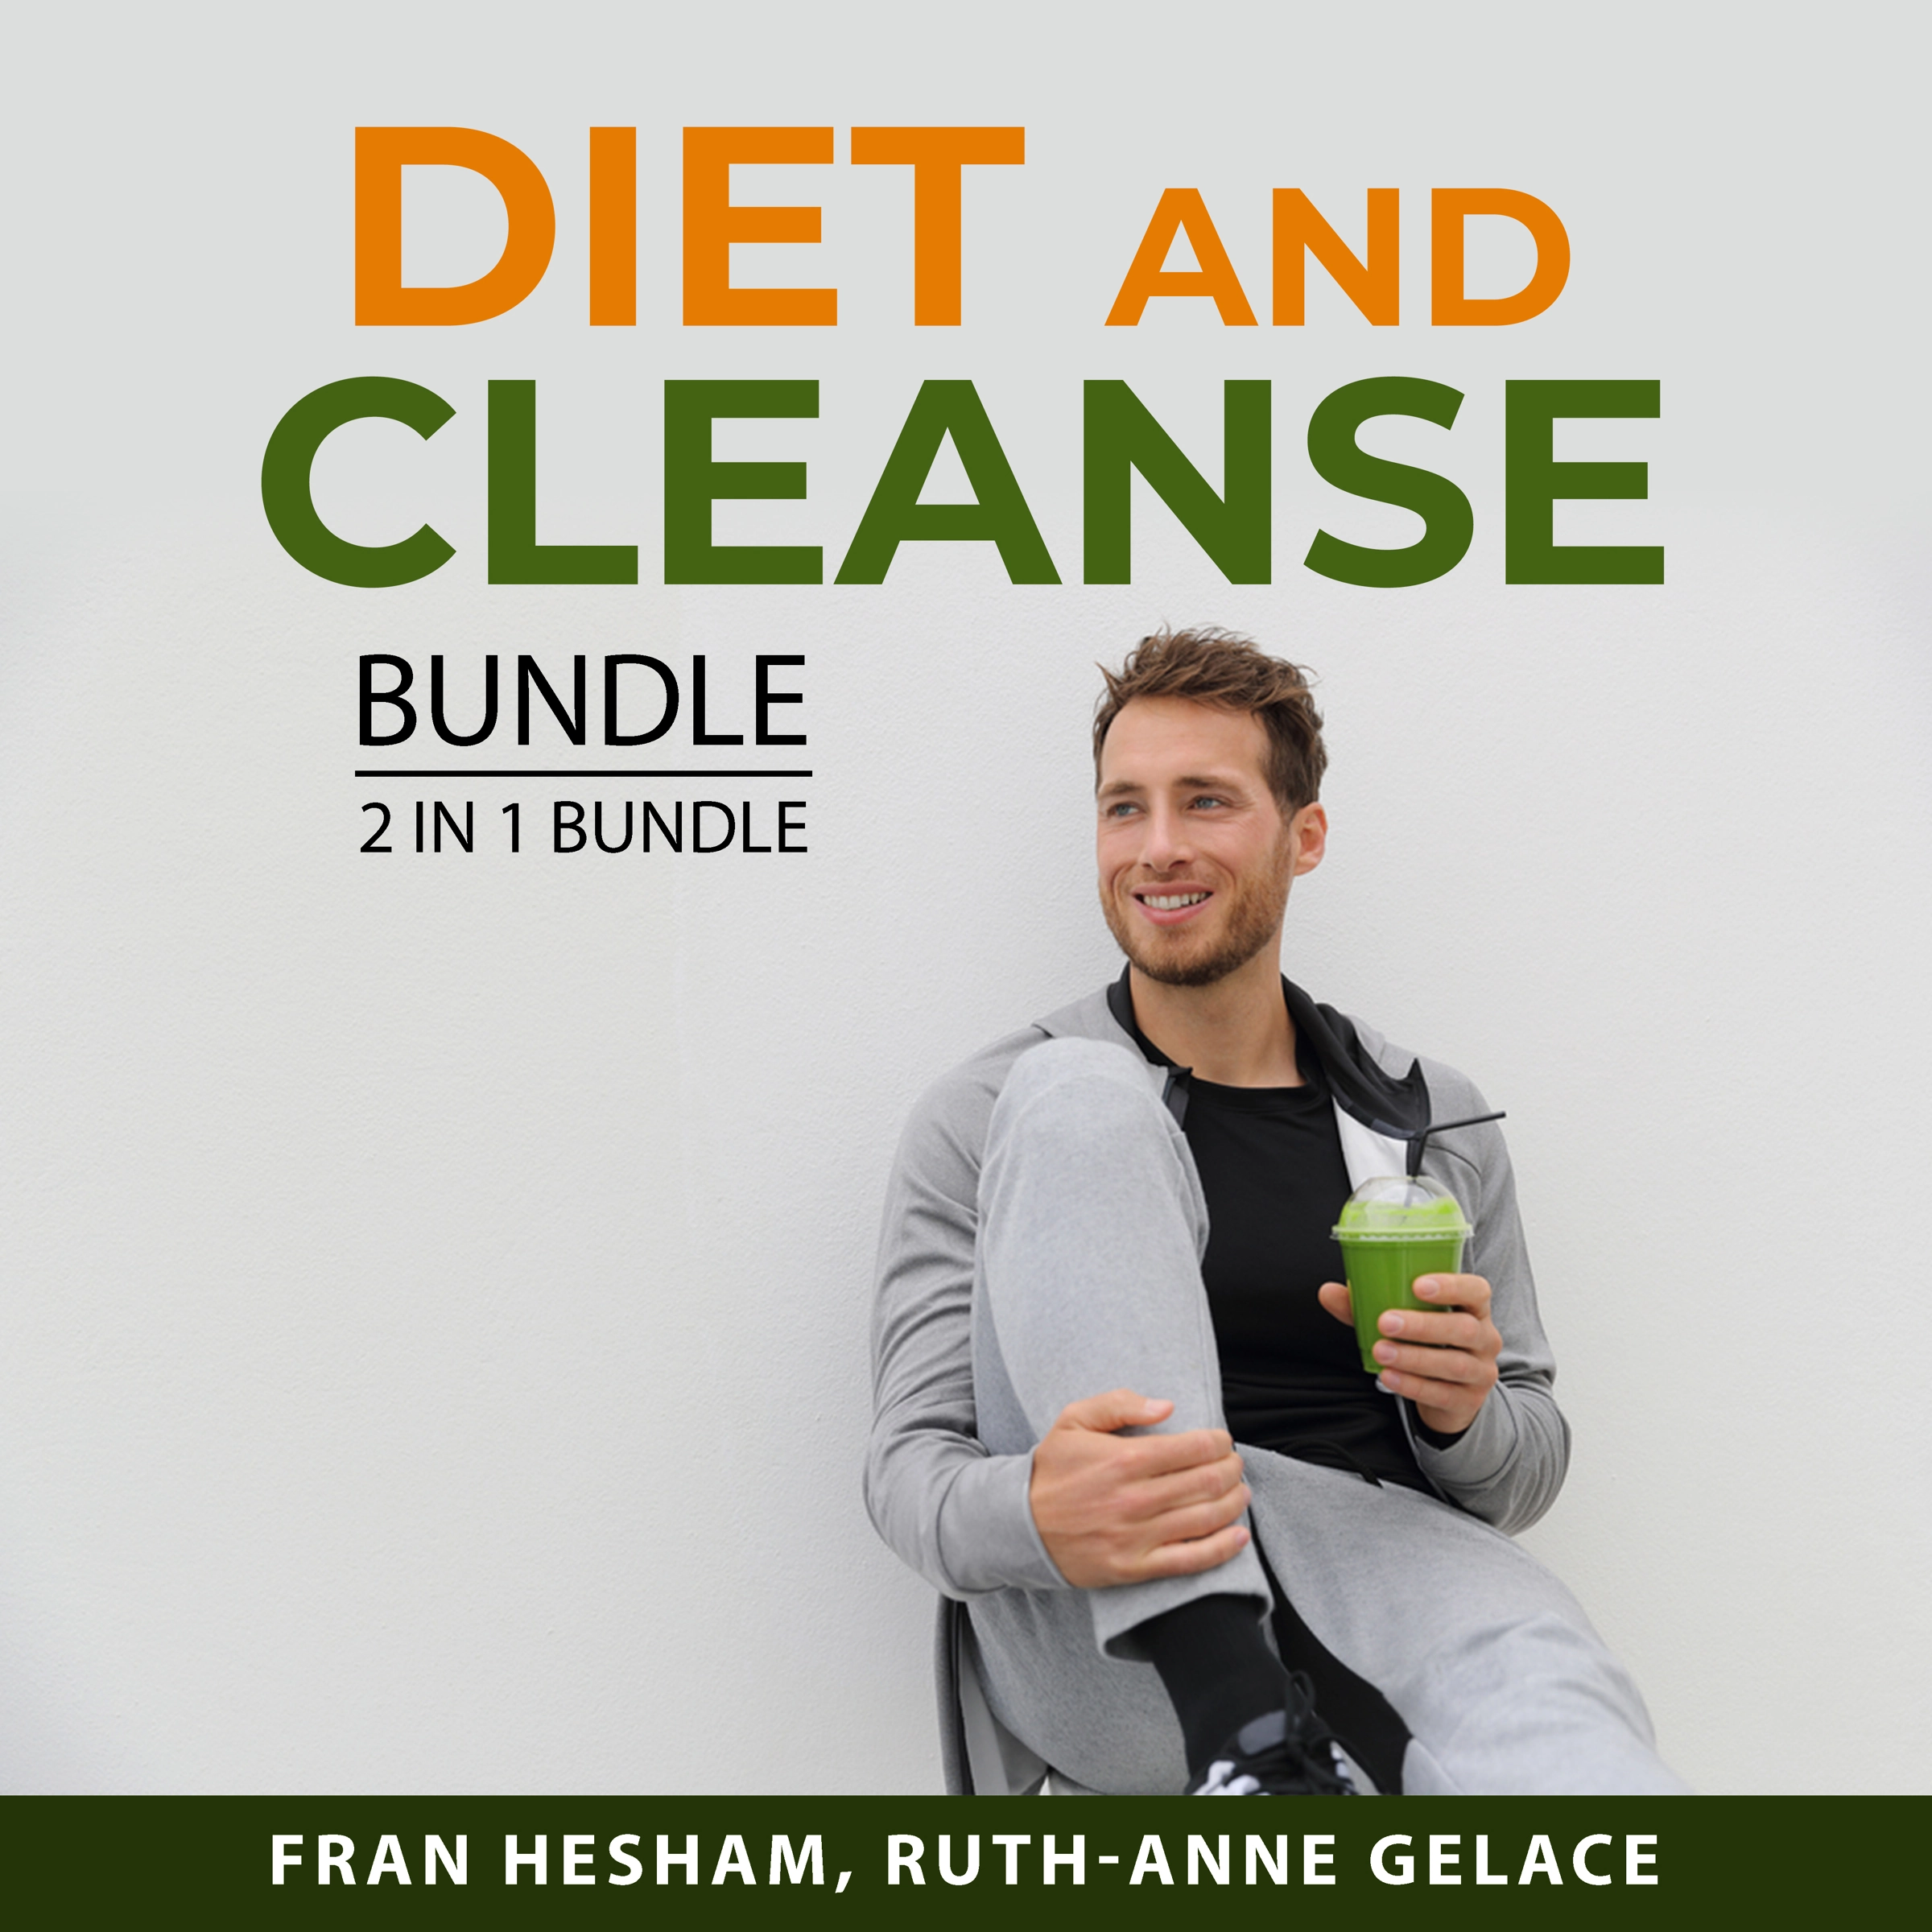 Diet and Cleanse Bundle, 2 in 1 Bundle Audiobook by Ruth-Anne Gelace